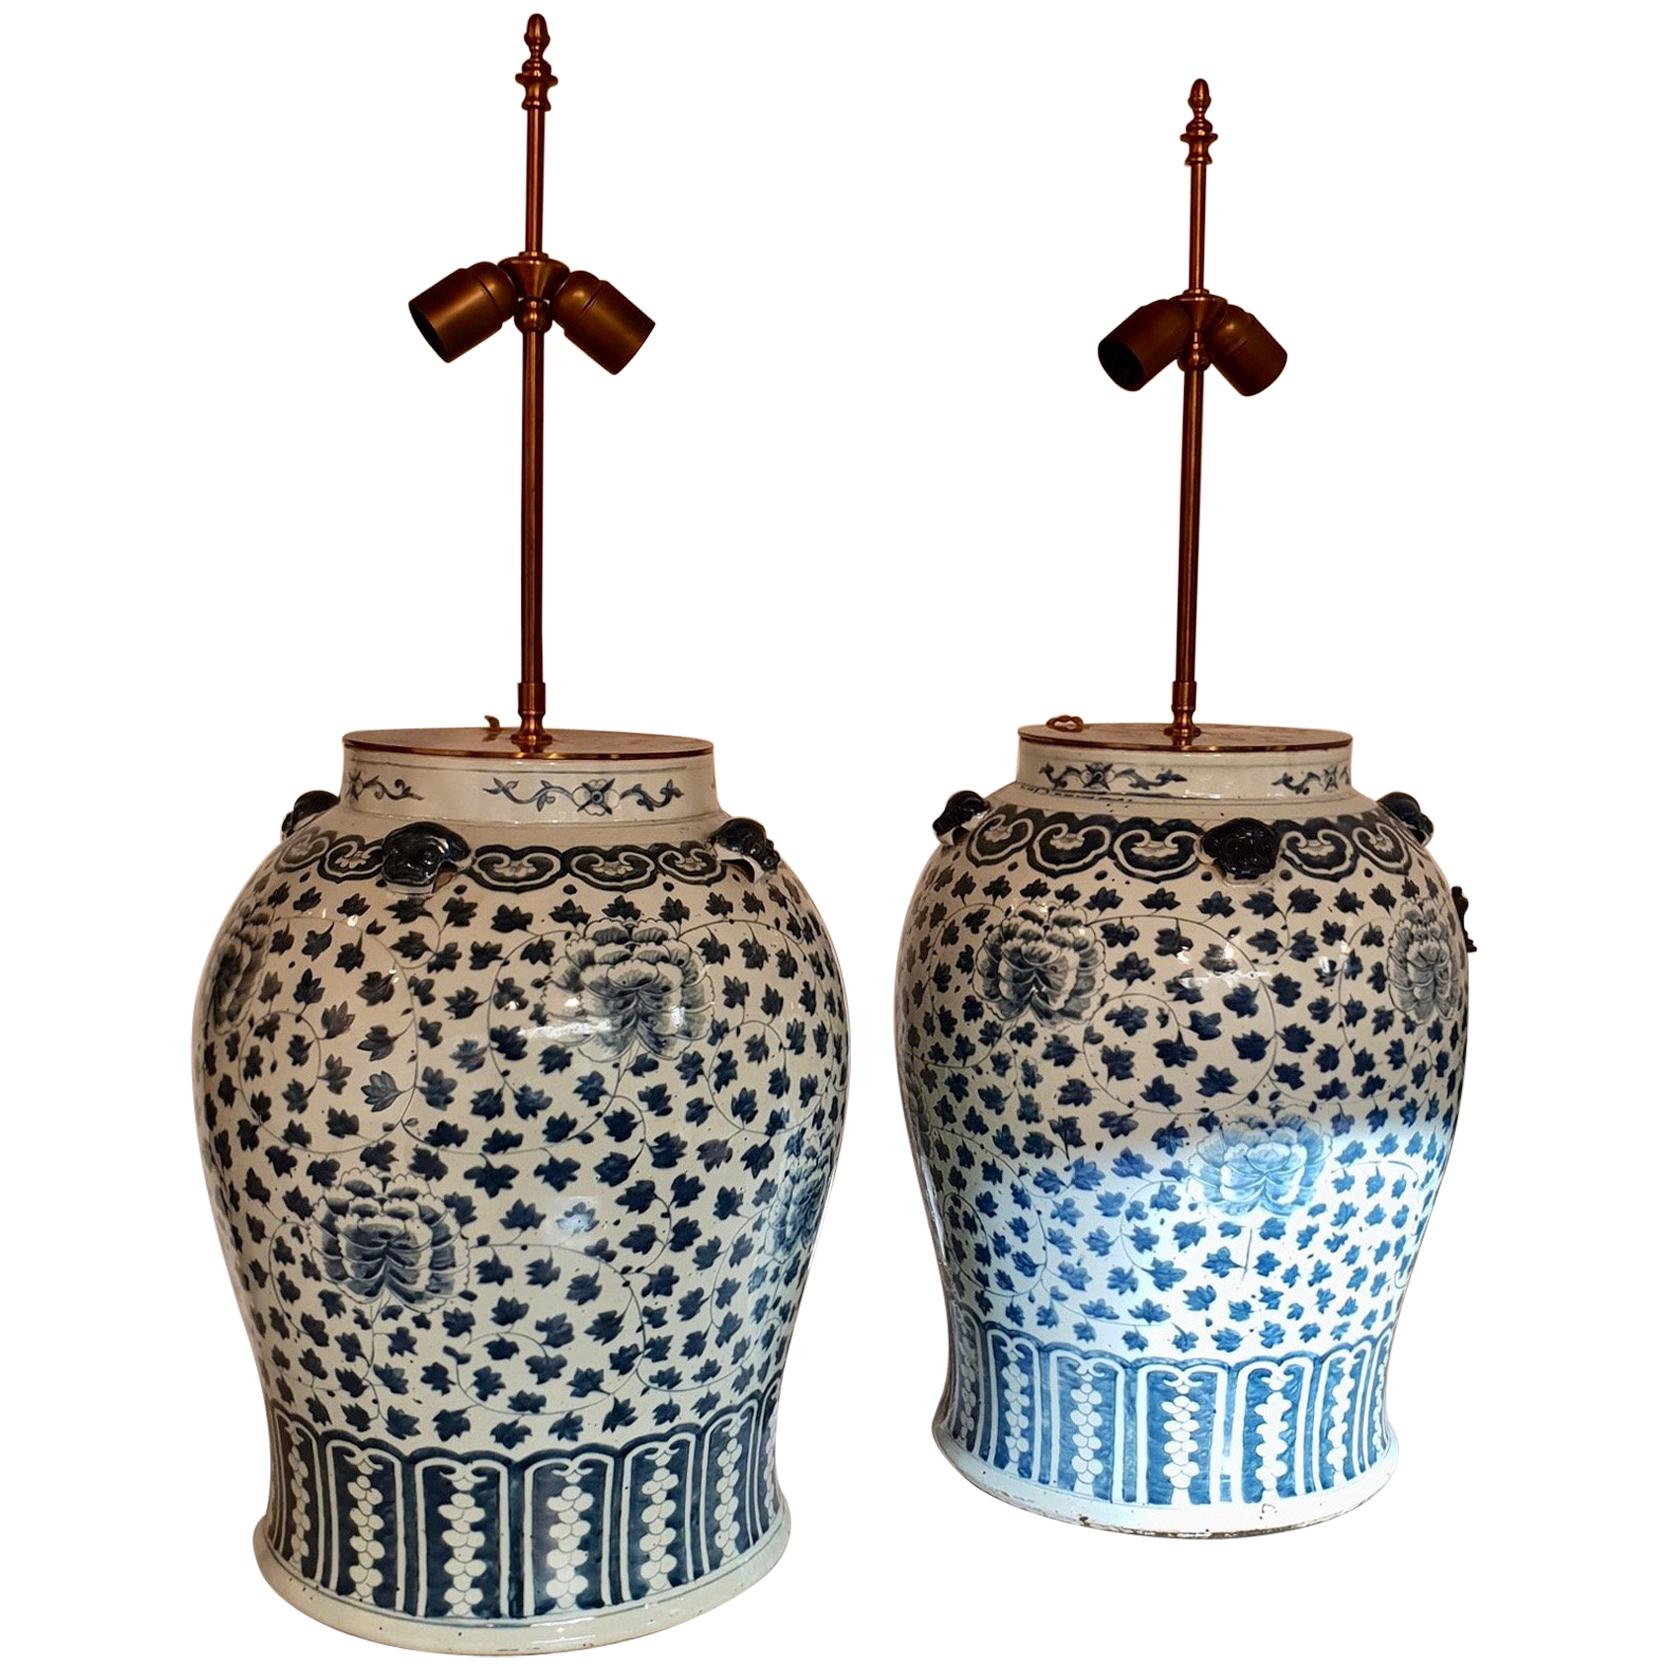 Two Large Chinese Table Lamps with Decor of Stylized Flowers and Dragons